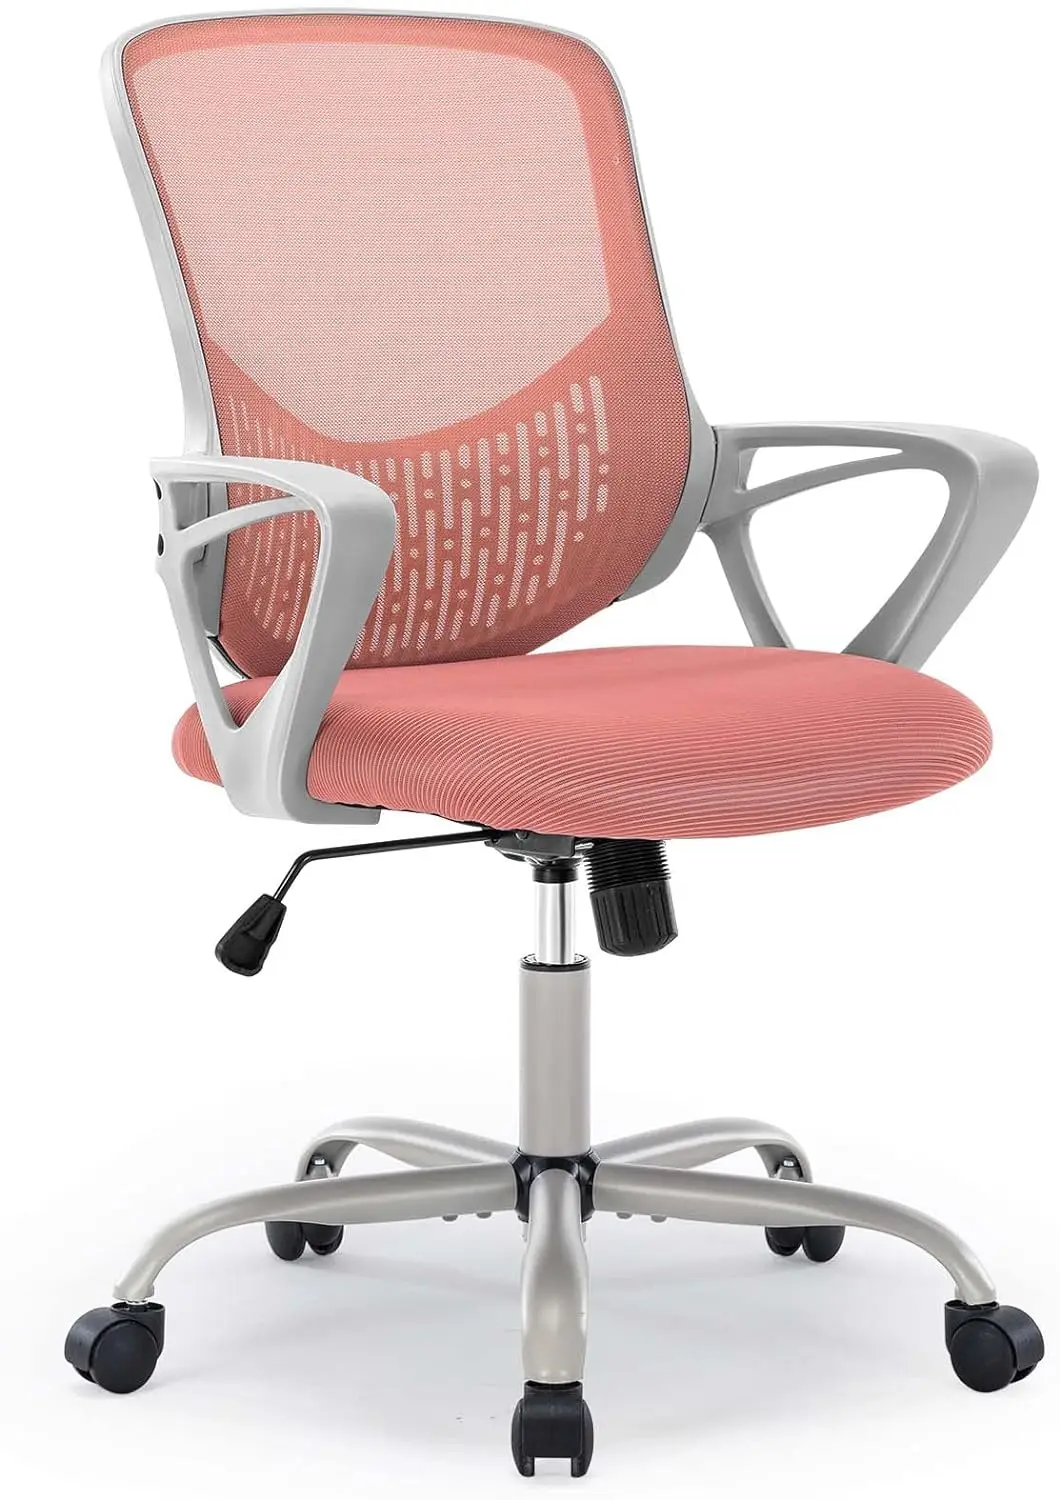 Office Home Desk Mesh Fixed Armrest, Executive Computer Chair with Soft Foam Seat Cushion and Lumbar Support gel seat cushion office car comfortable pain relieve buttocks support memory foam cushion